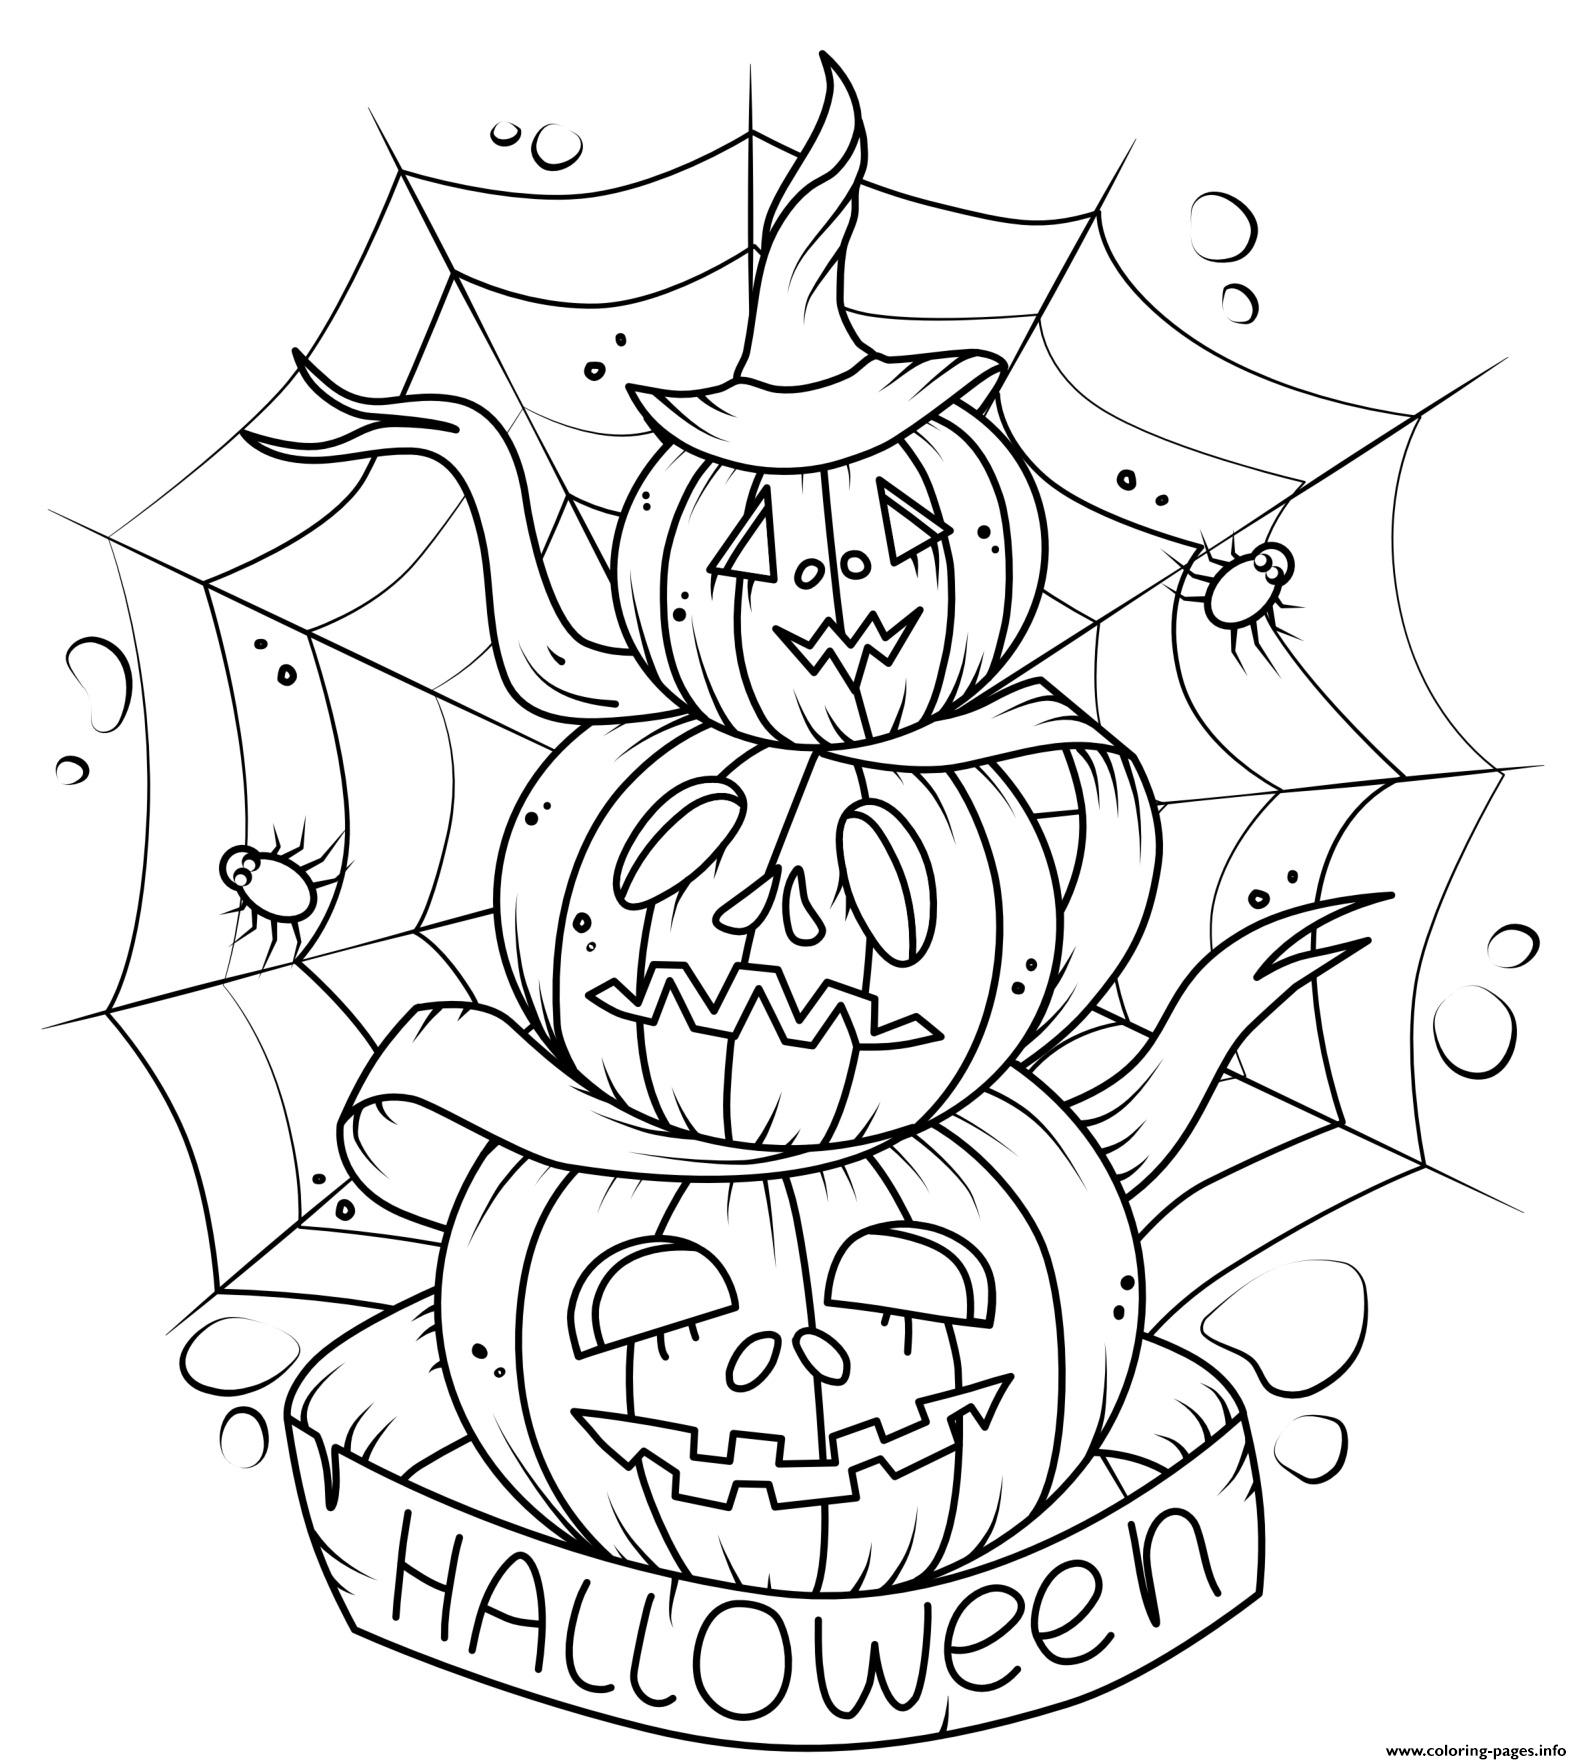 Pumpkin Scary Pile Of Pumpkins Spiders Web coloring